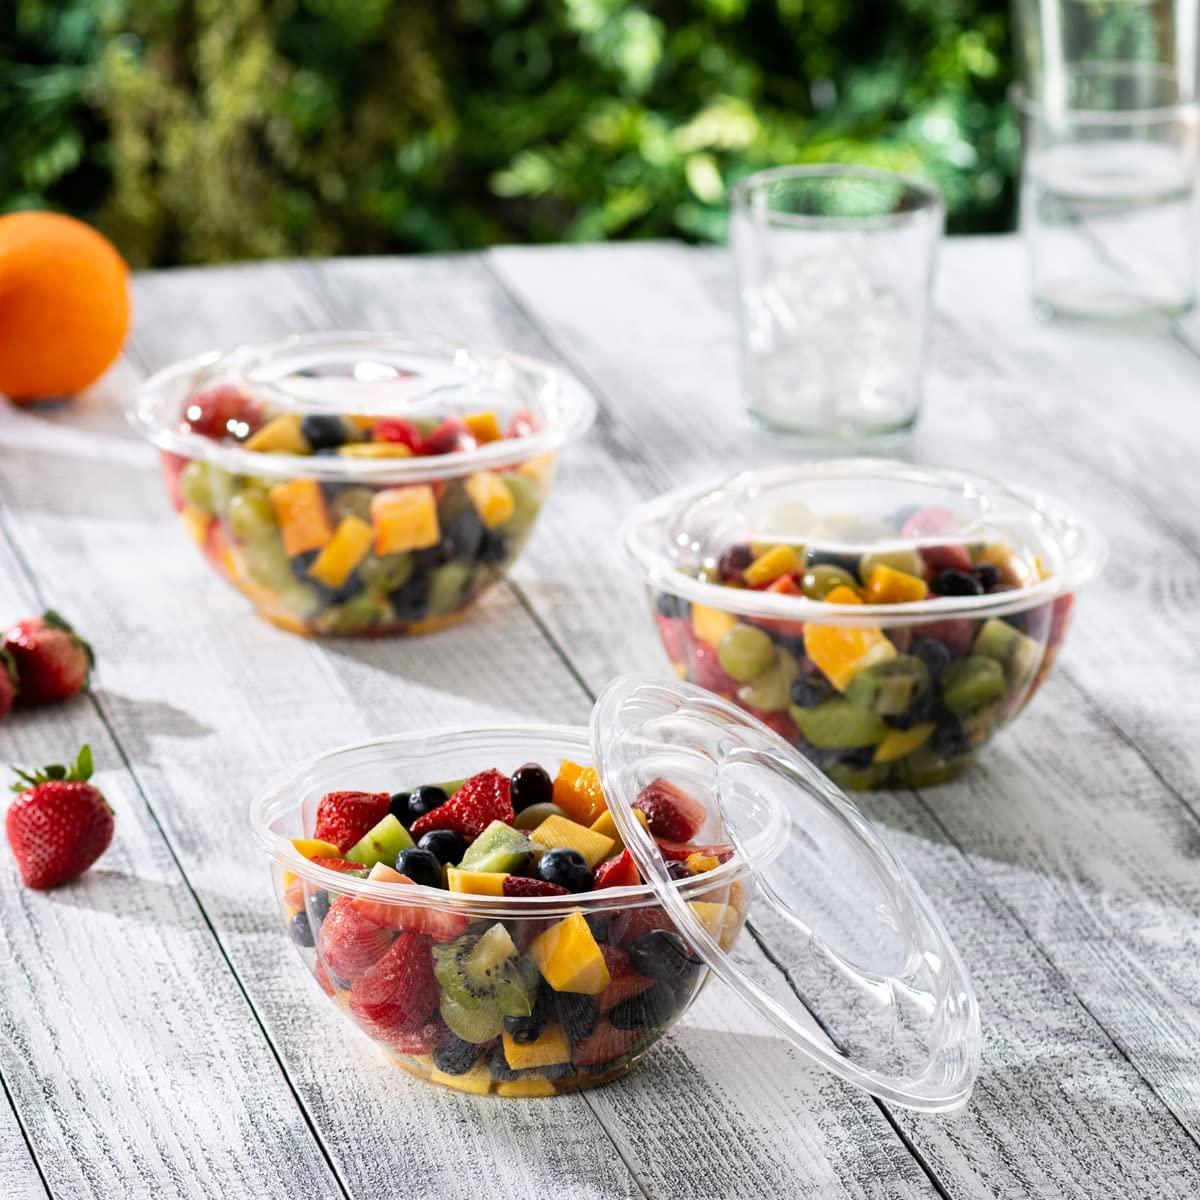 BULK 32 Oz Disposable Plastic Salad Bowls/Containers with Airtight Lids  (100) 